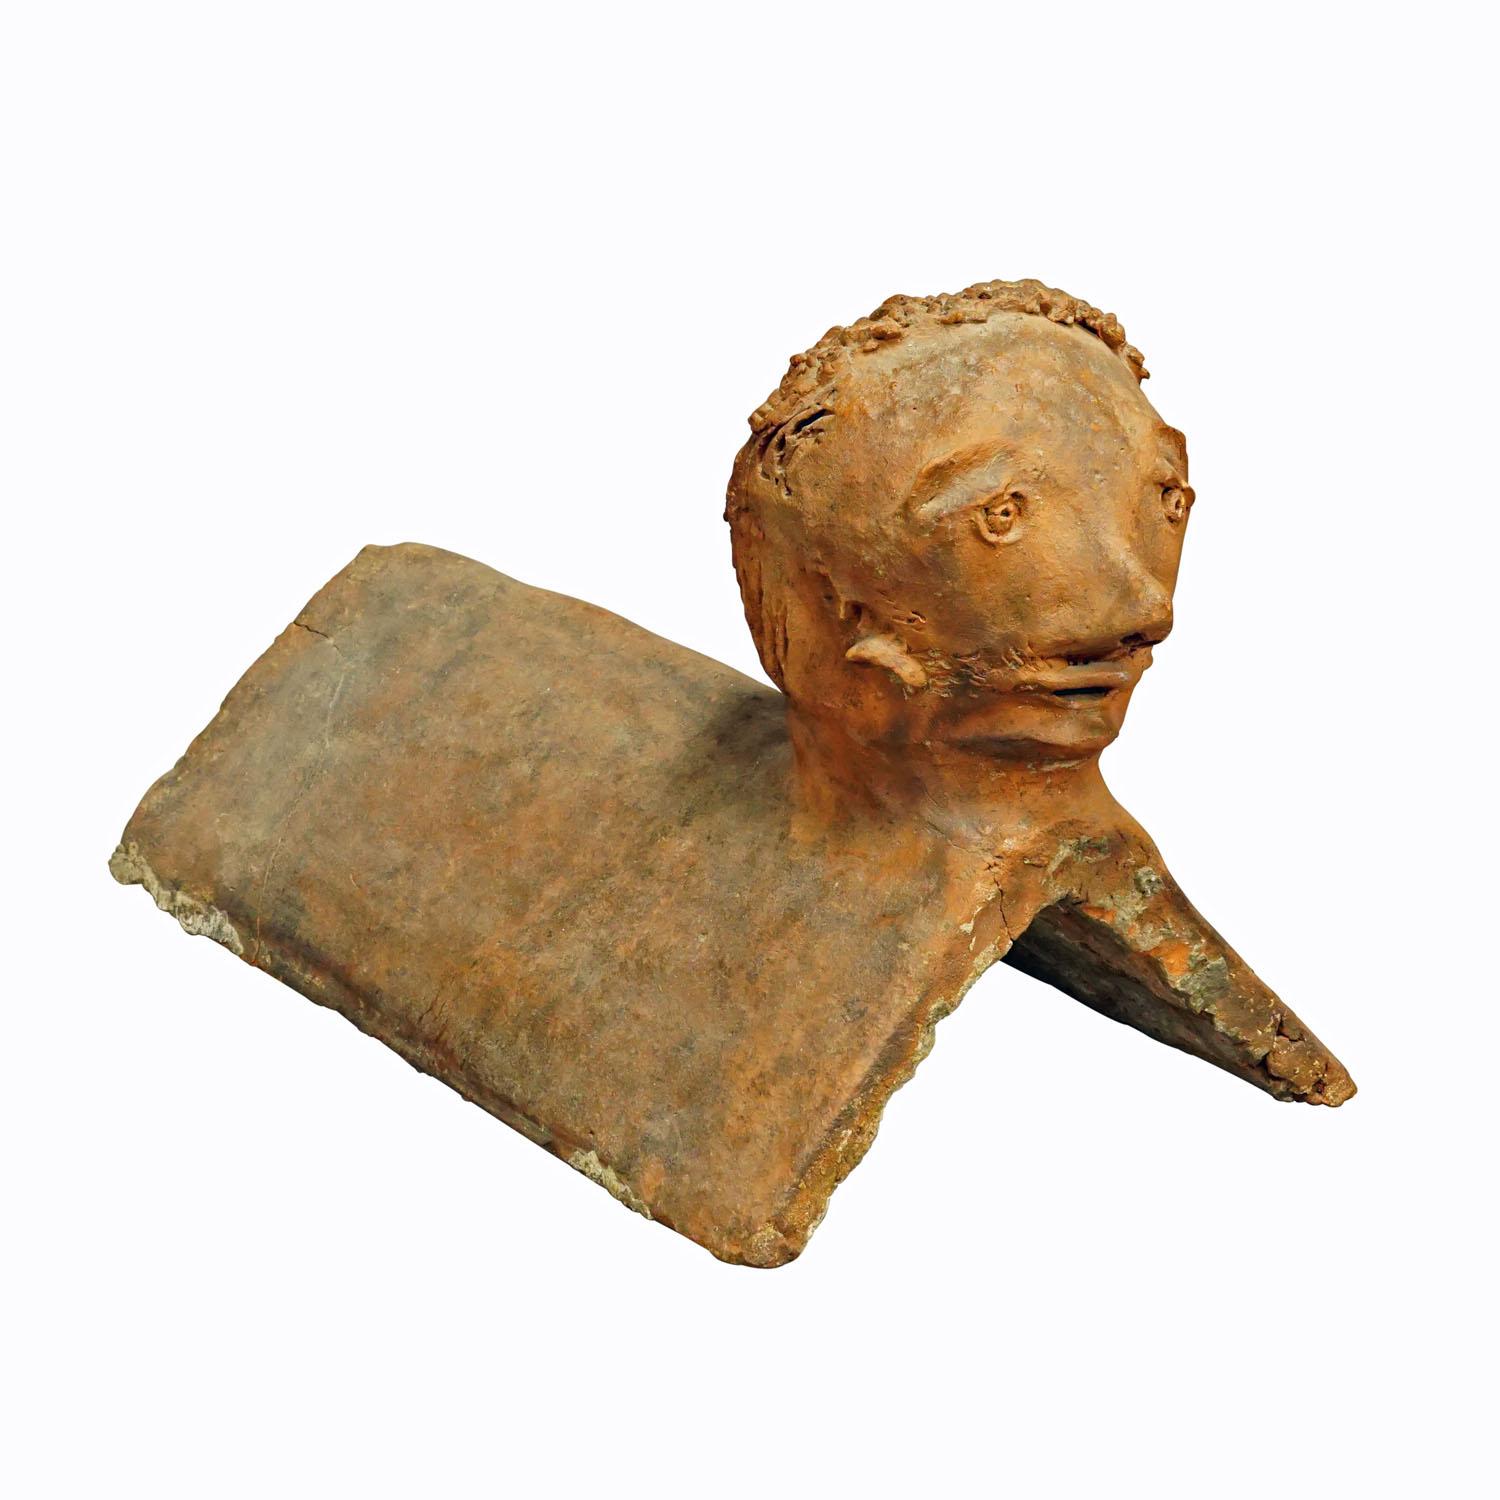 Antique Handmade Roof Rider Brick, Germany 1844

An antique roof rider made of clay featuring a head in outsider art style. Handmade in Germany in 1844. Good condition, one edge cut of. Inscribed signature with the year of manufacture on one